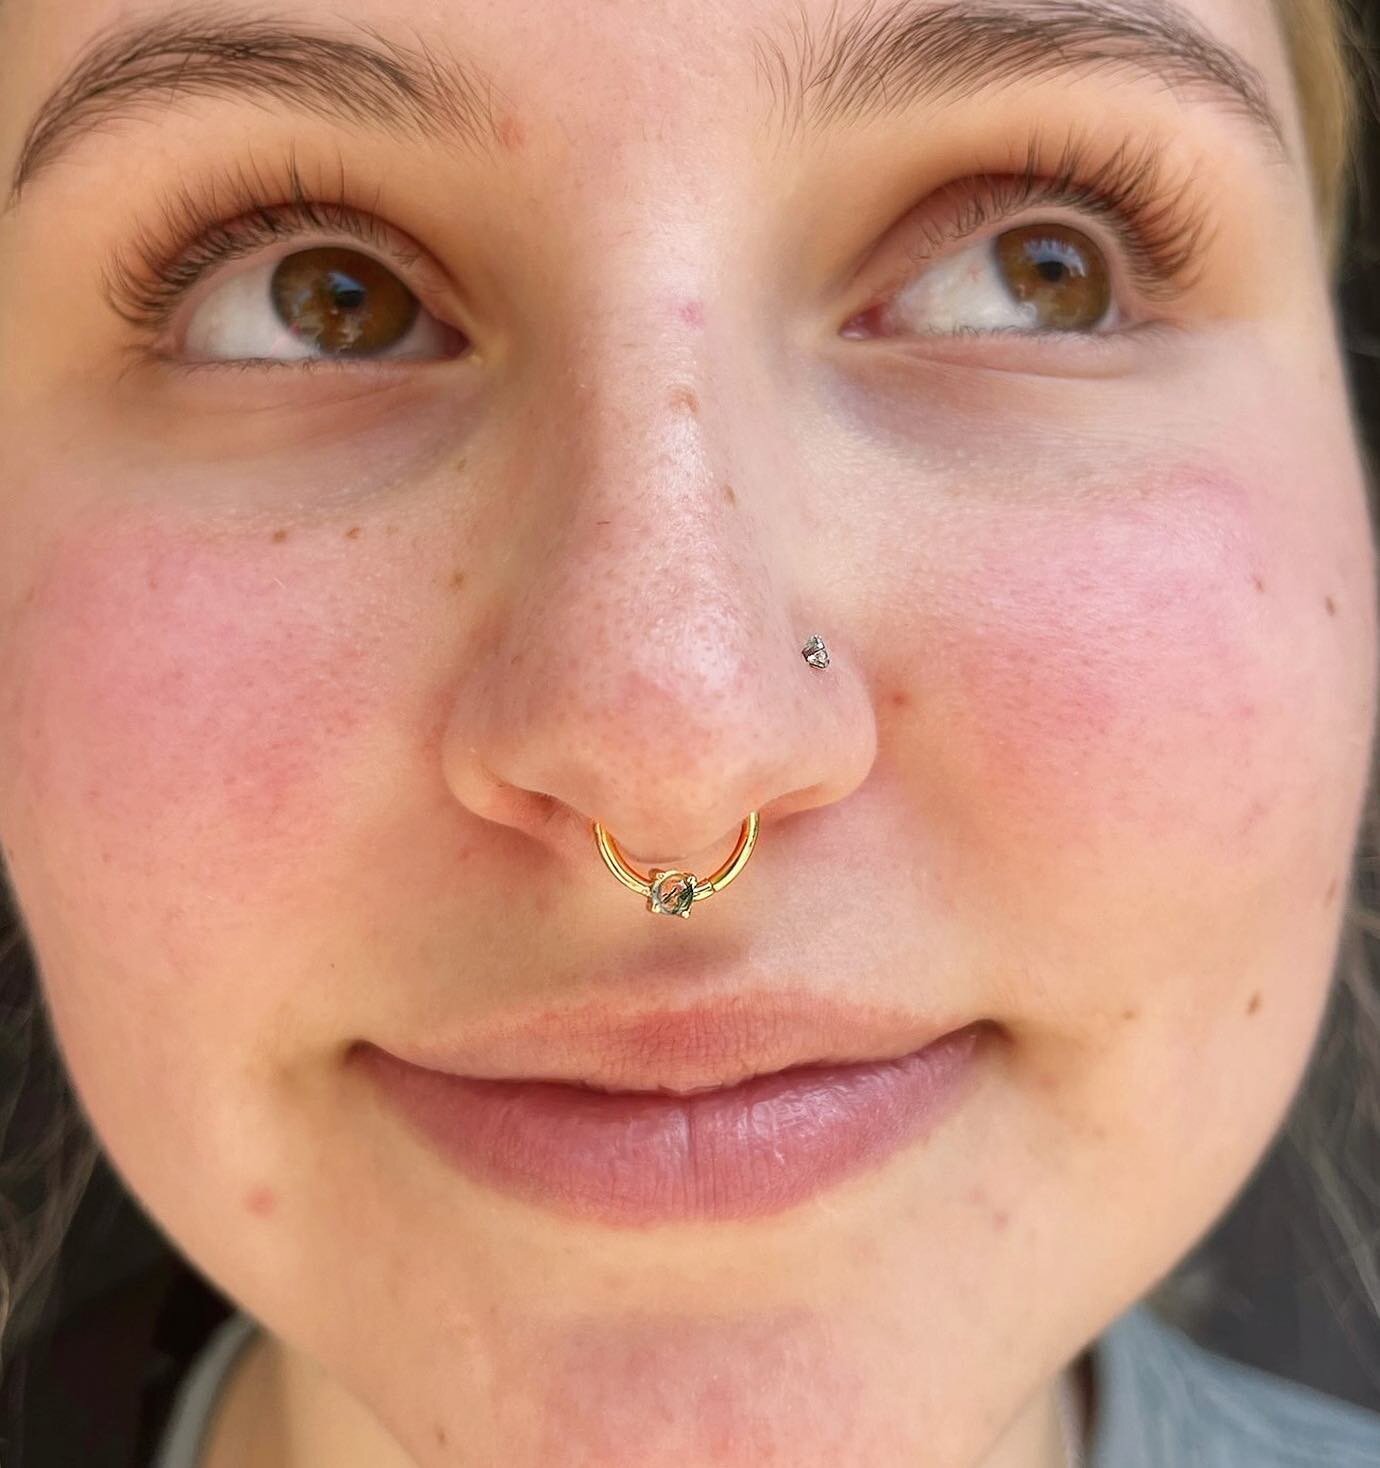 A lovely septum upgrade from @b_eb_ + @thirdbevel using a moss agate ring set in 14k yellow gold. 🌵